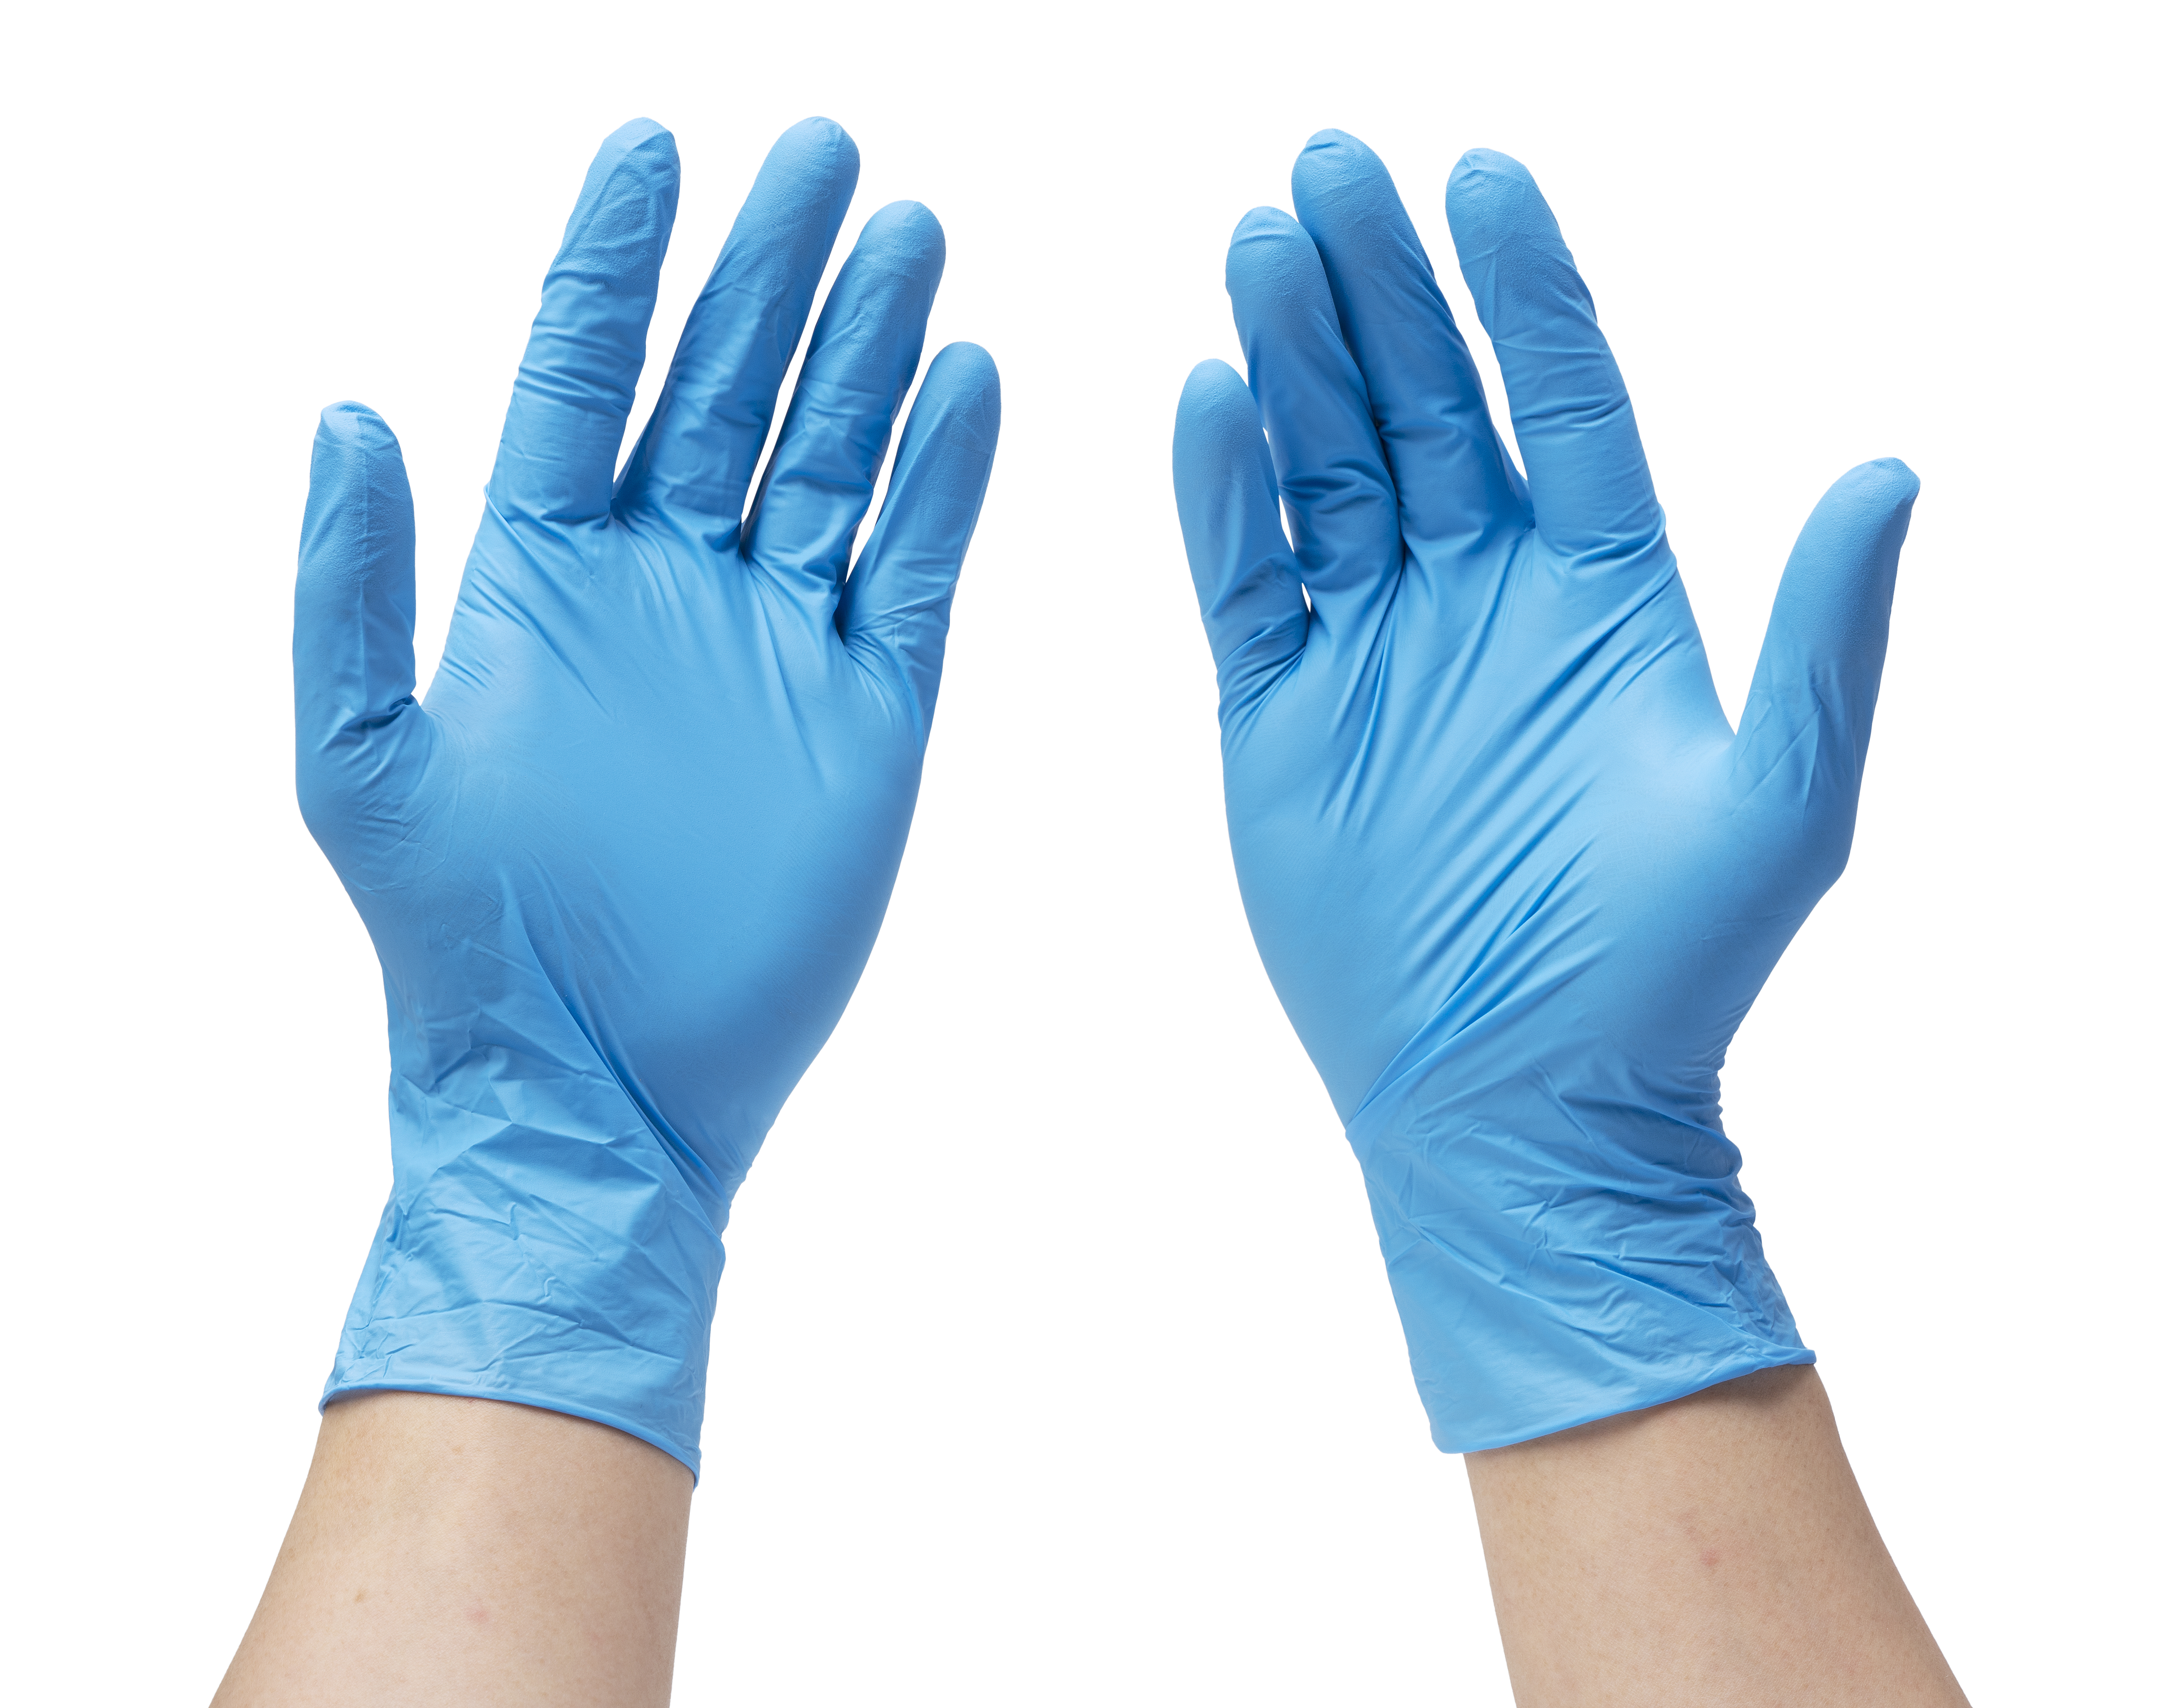 What's the difference between textured gloves and smooth gloves